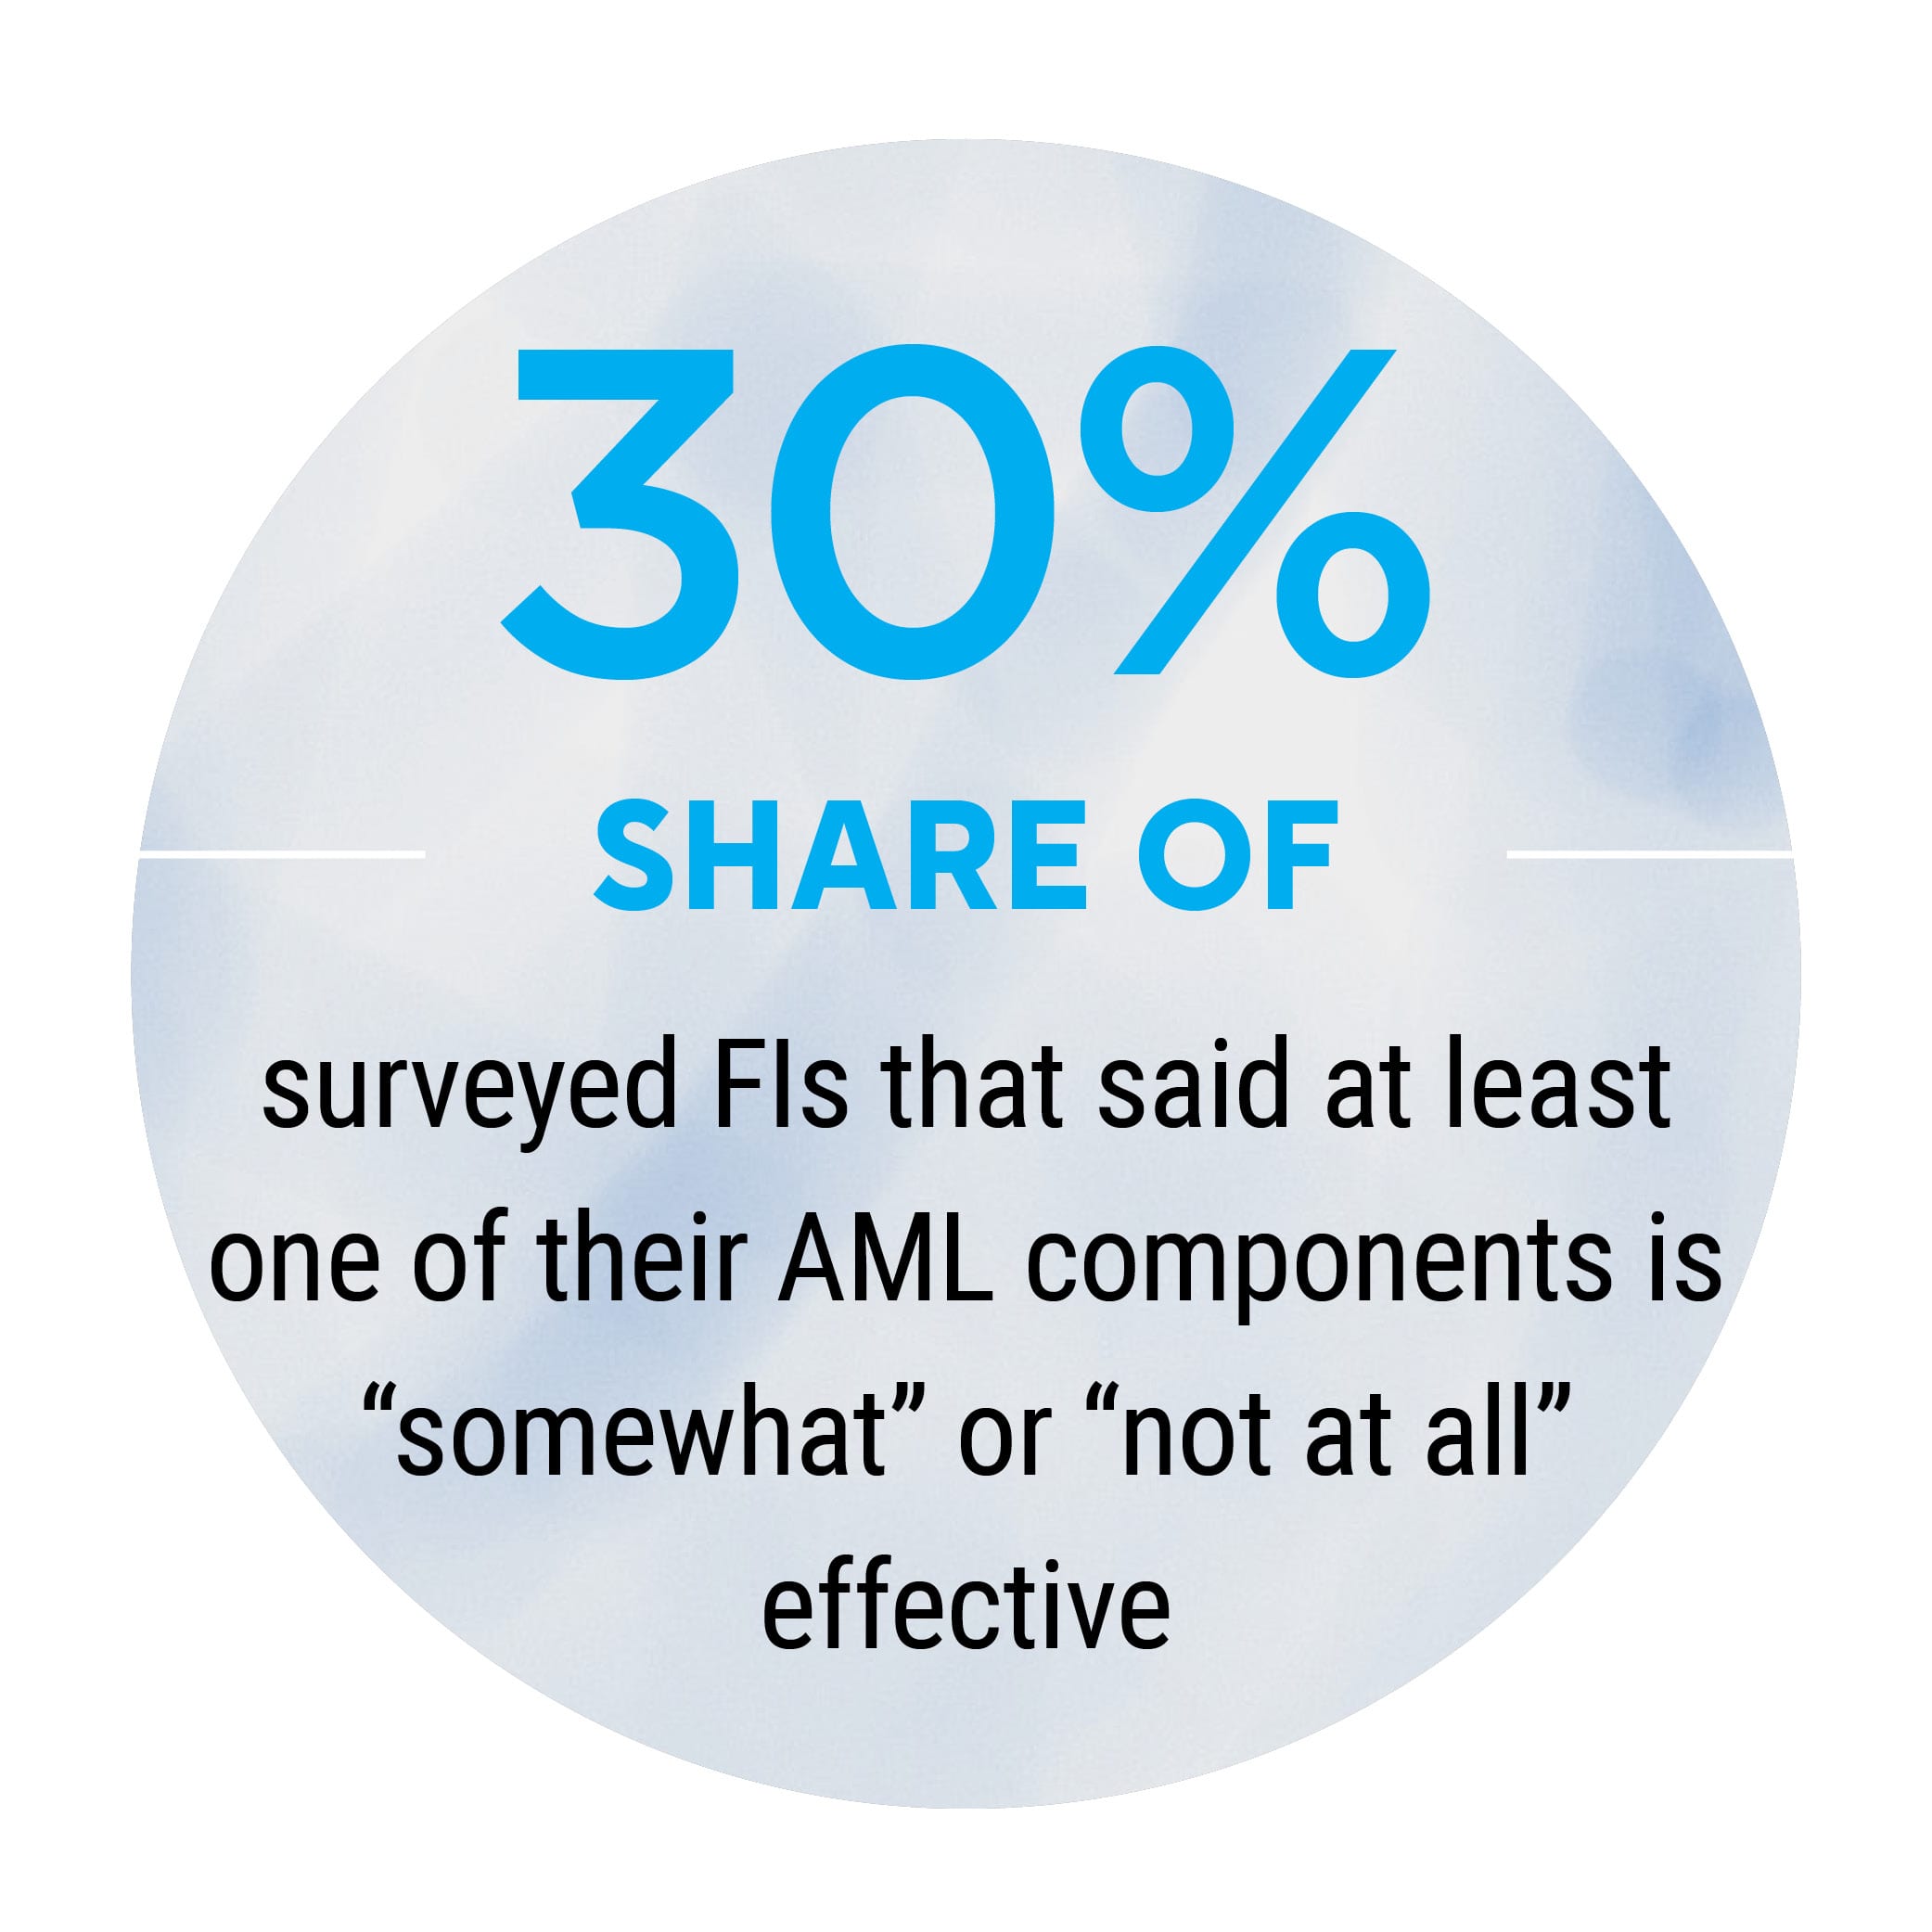 30%: Share of surveyed FIs that said at least one of their AML components is "somewhat" or "not at all" effective